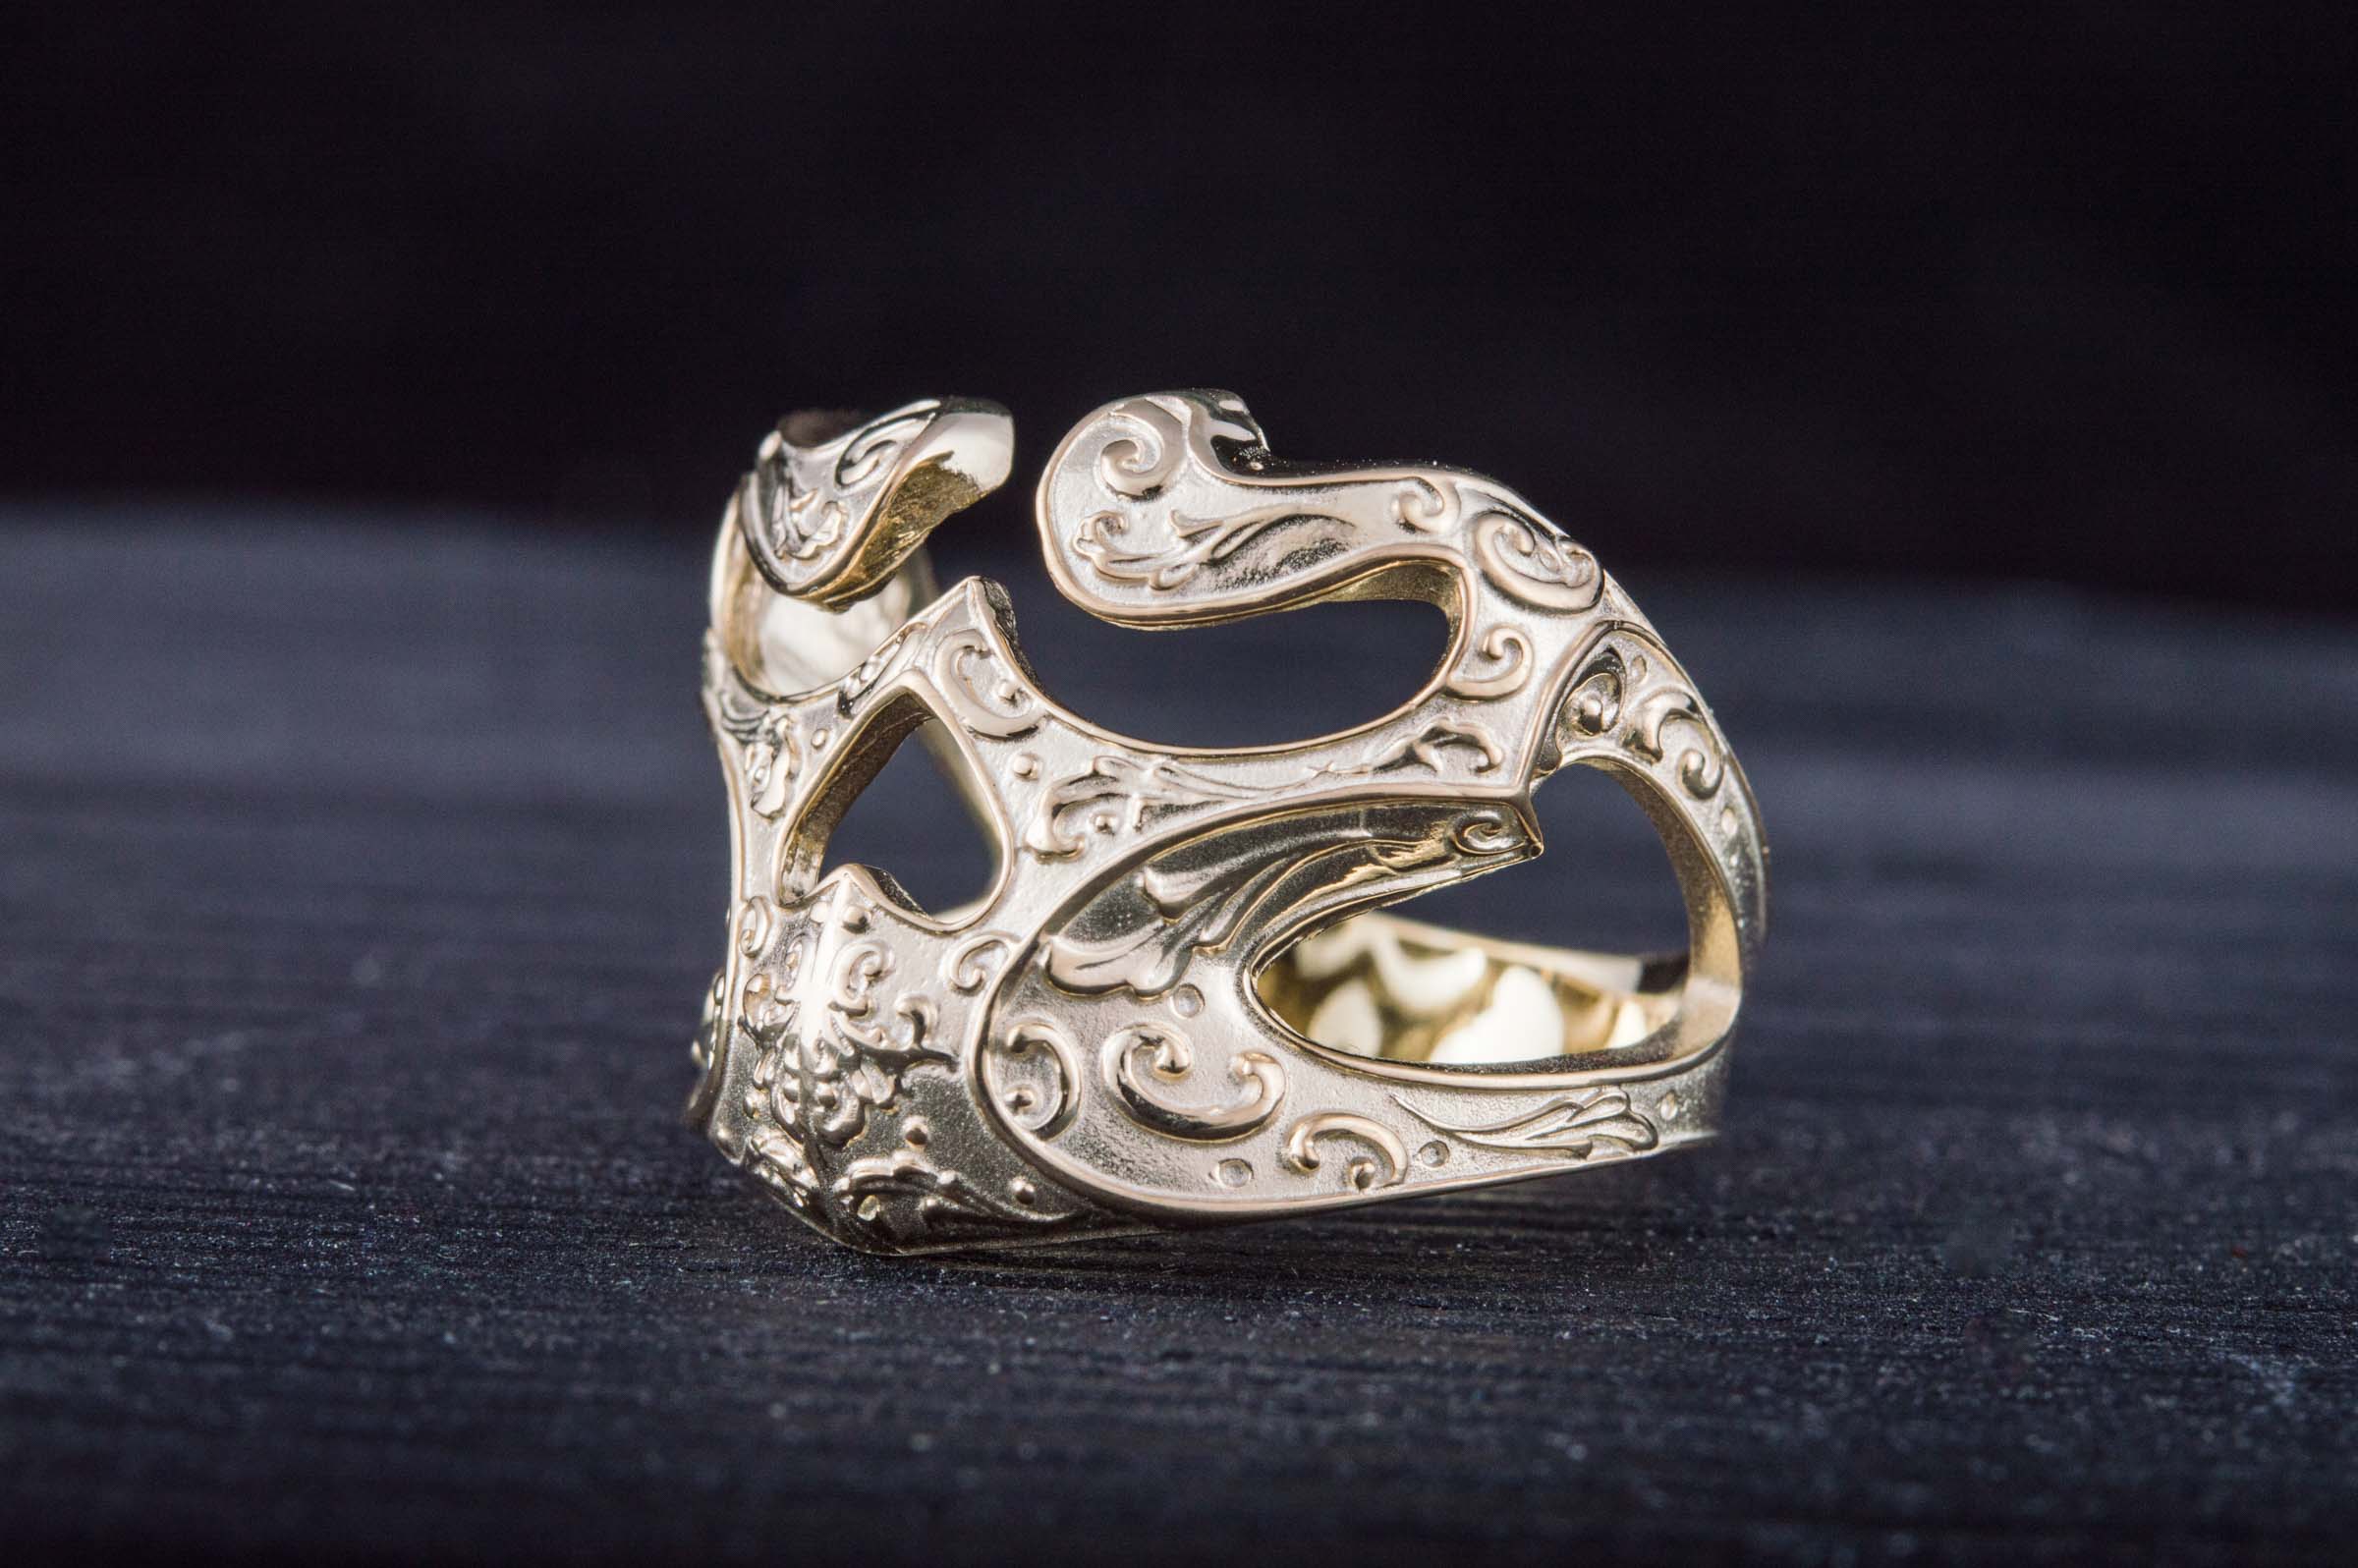 14K Gold Skull Ring with Ornament Unique Biker Jewelry